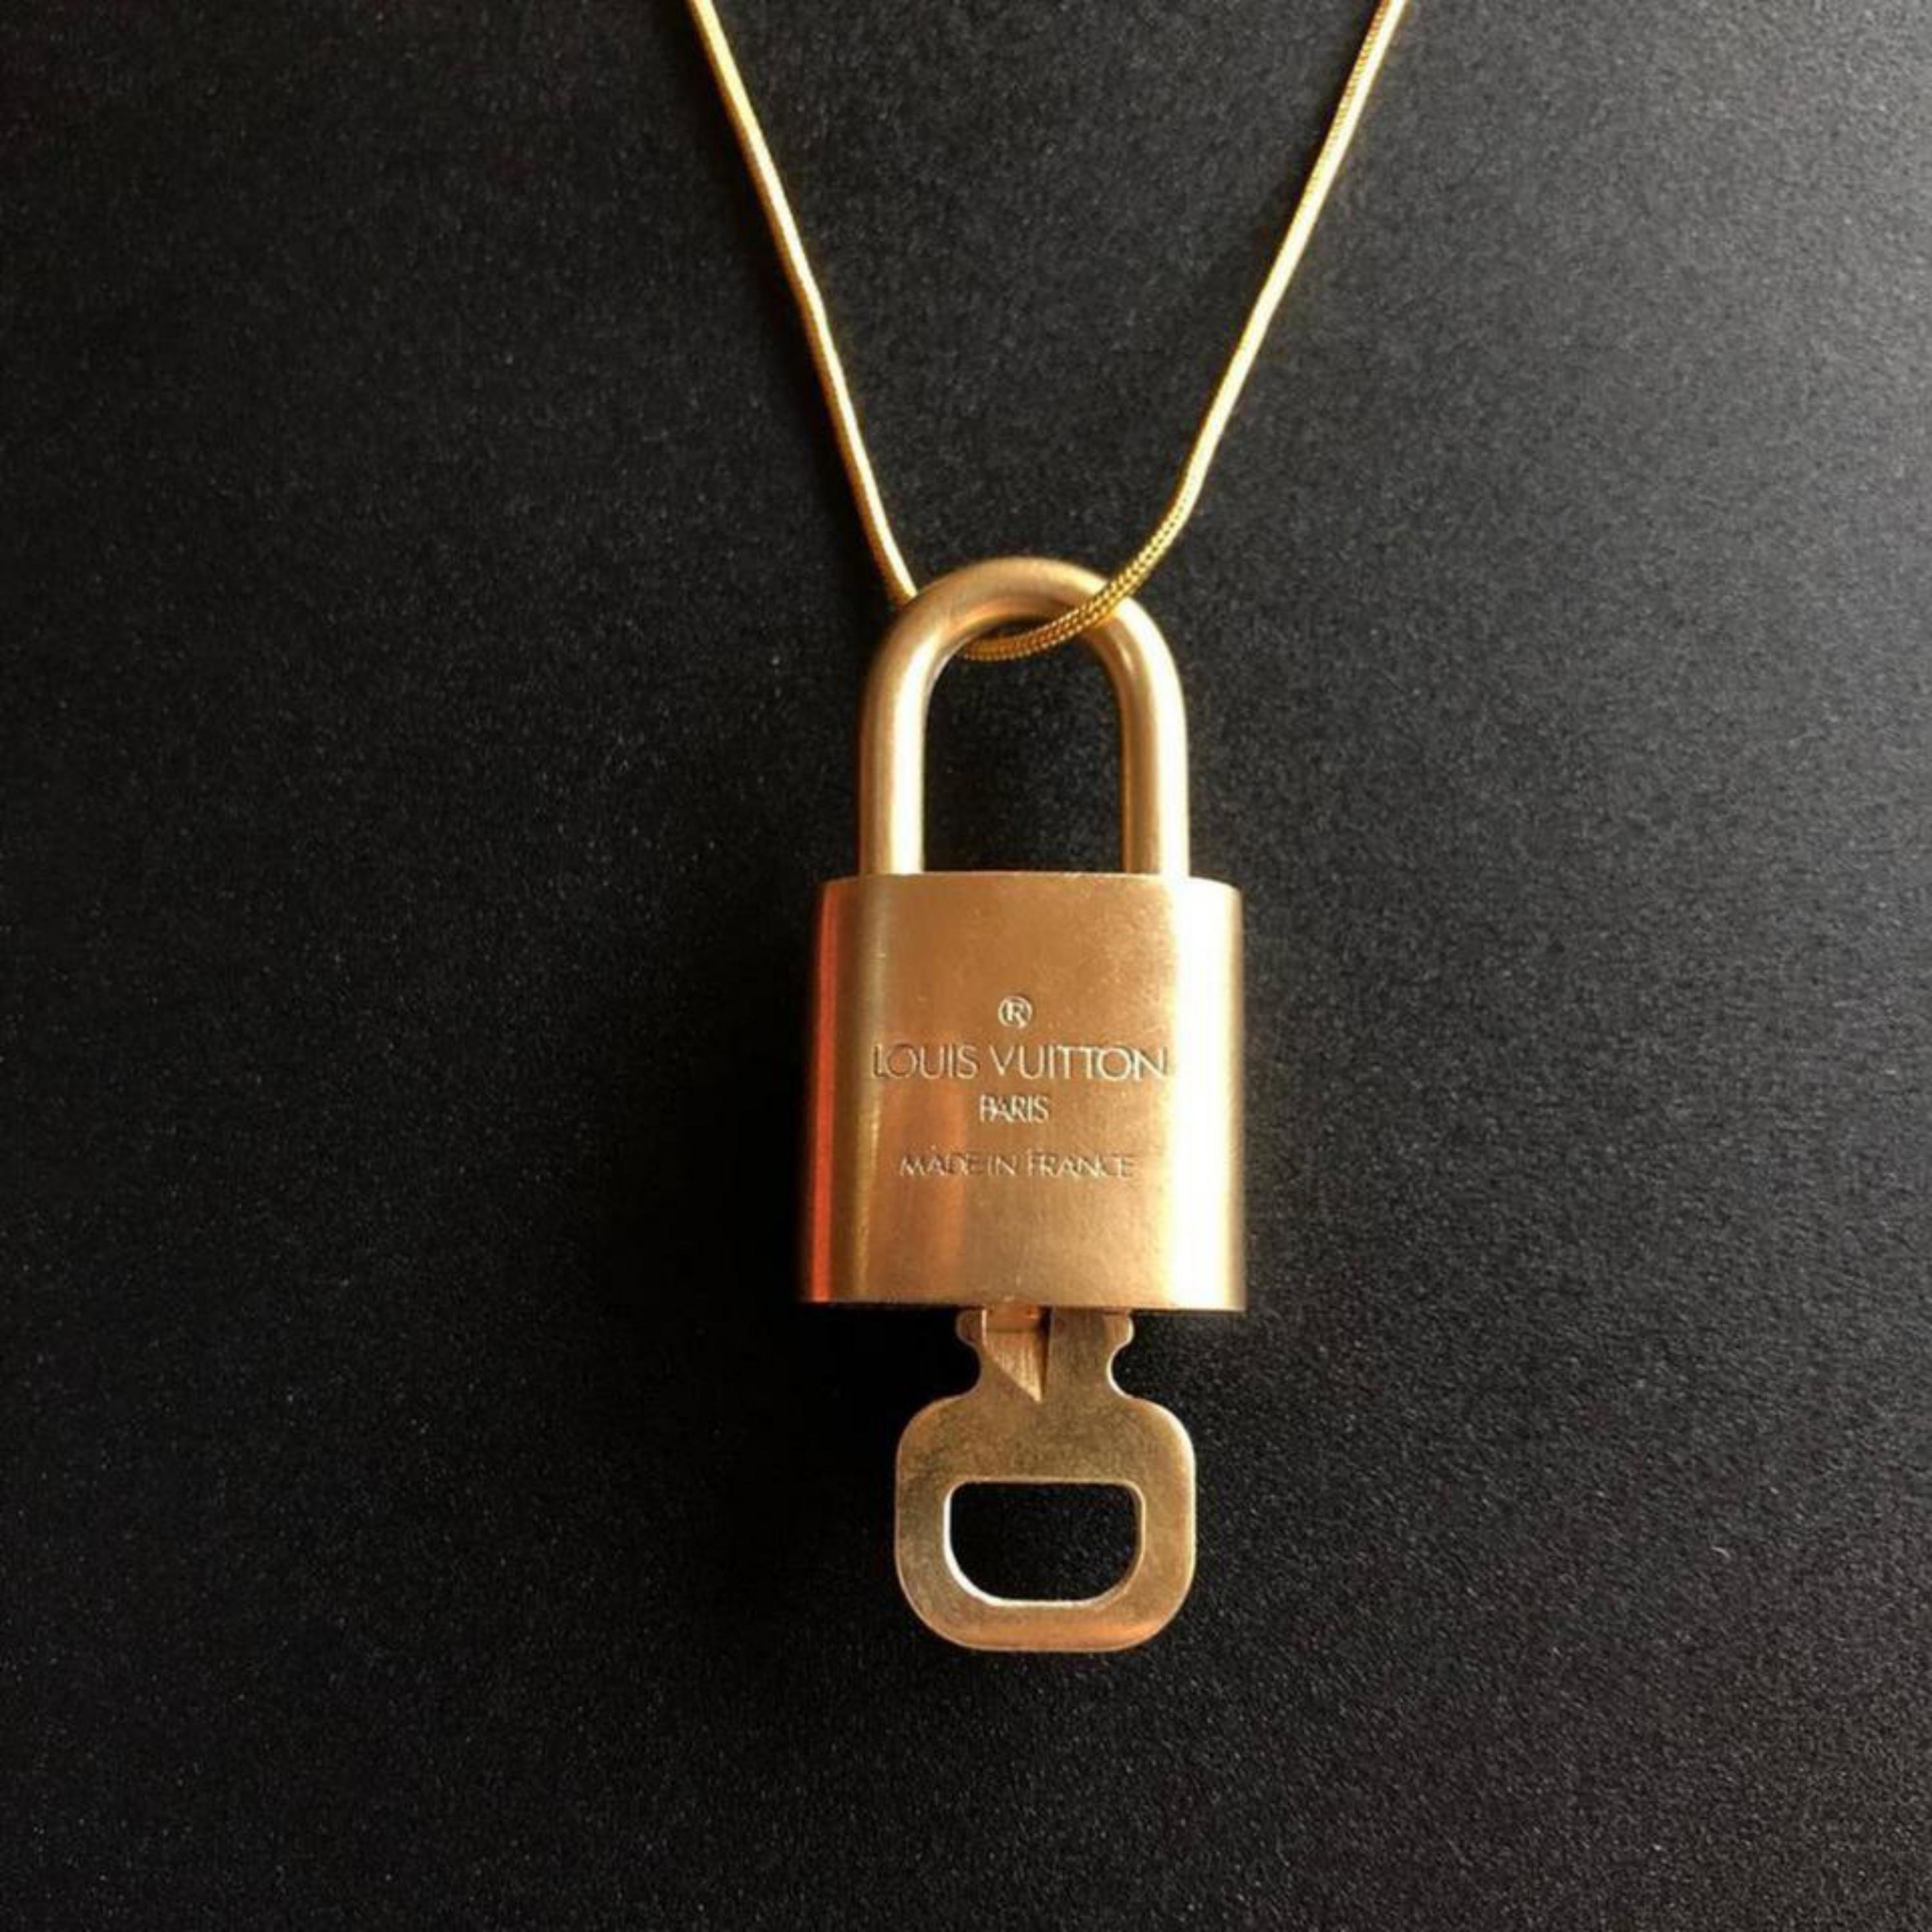 Louis Vuitton Gold Single Key Lock Pad Lock and Key 867586 For Sale 6